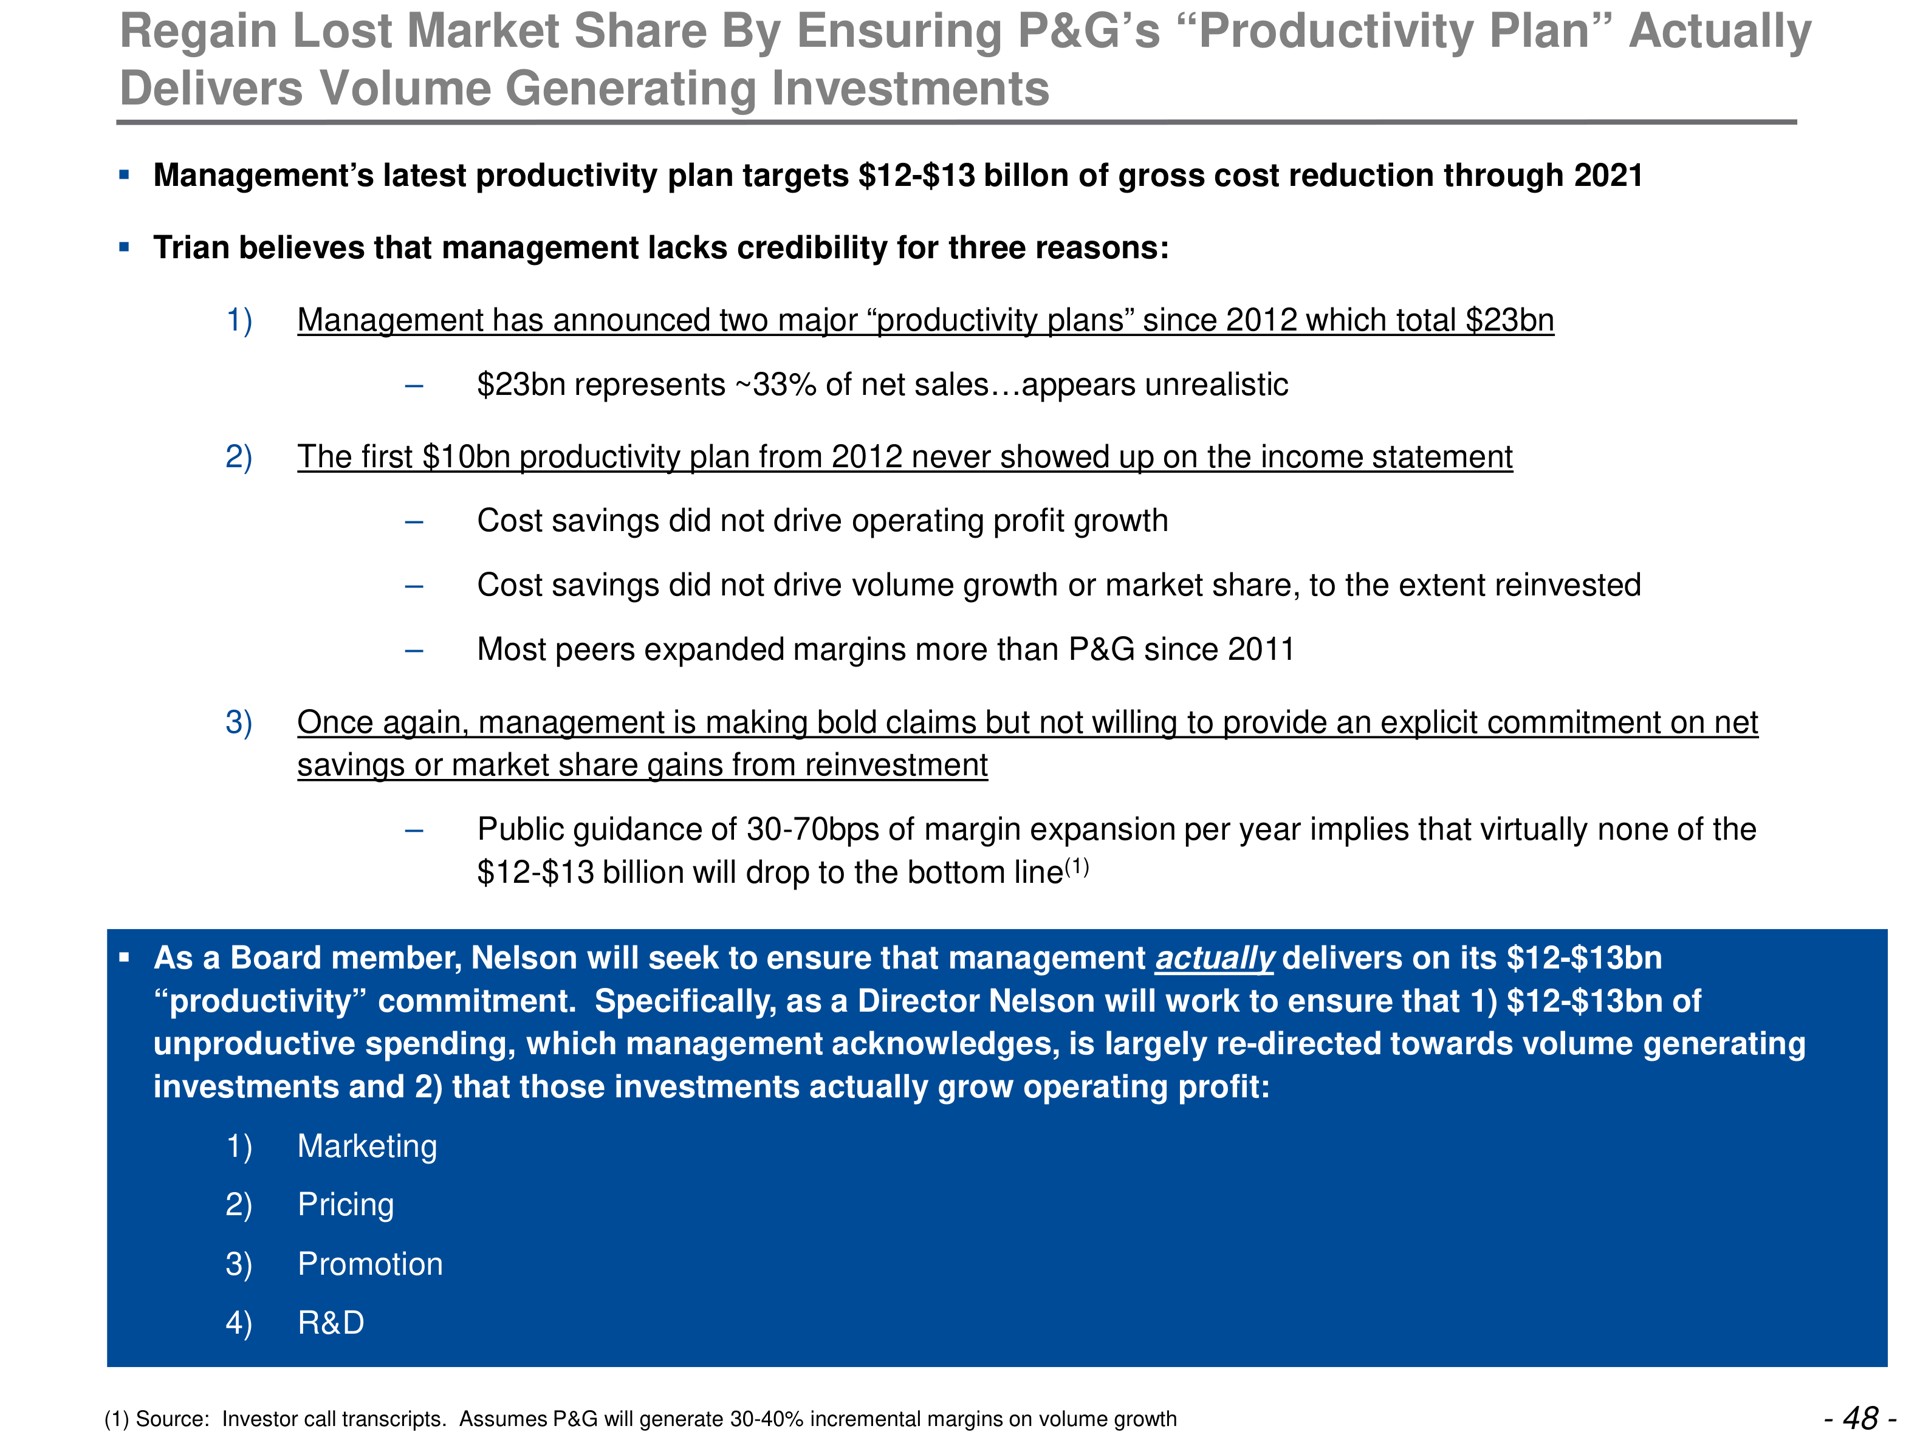 regain lost market share by ensuring productivity plan actually delivers volume generating investments | Trian Partners